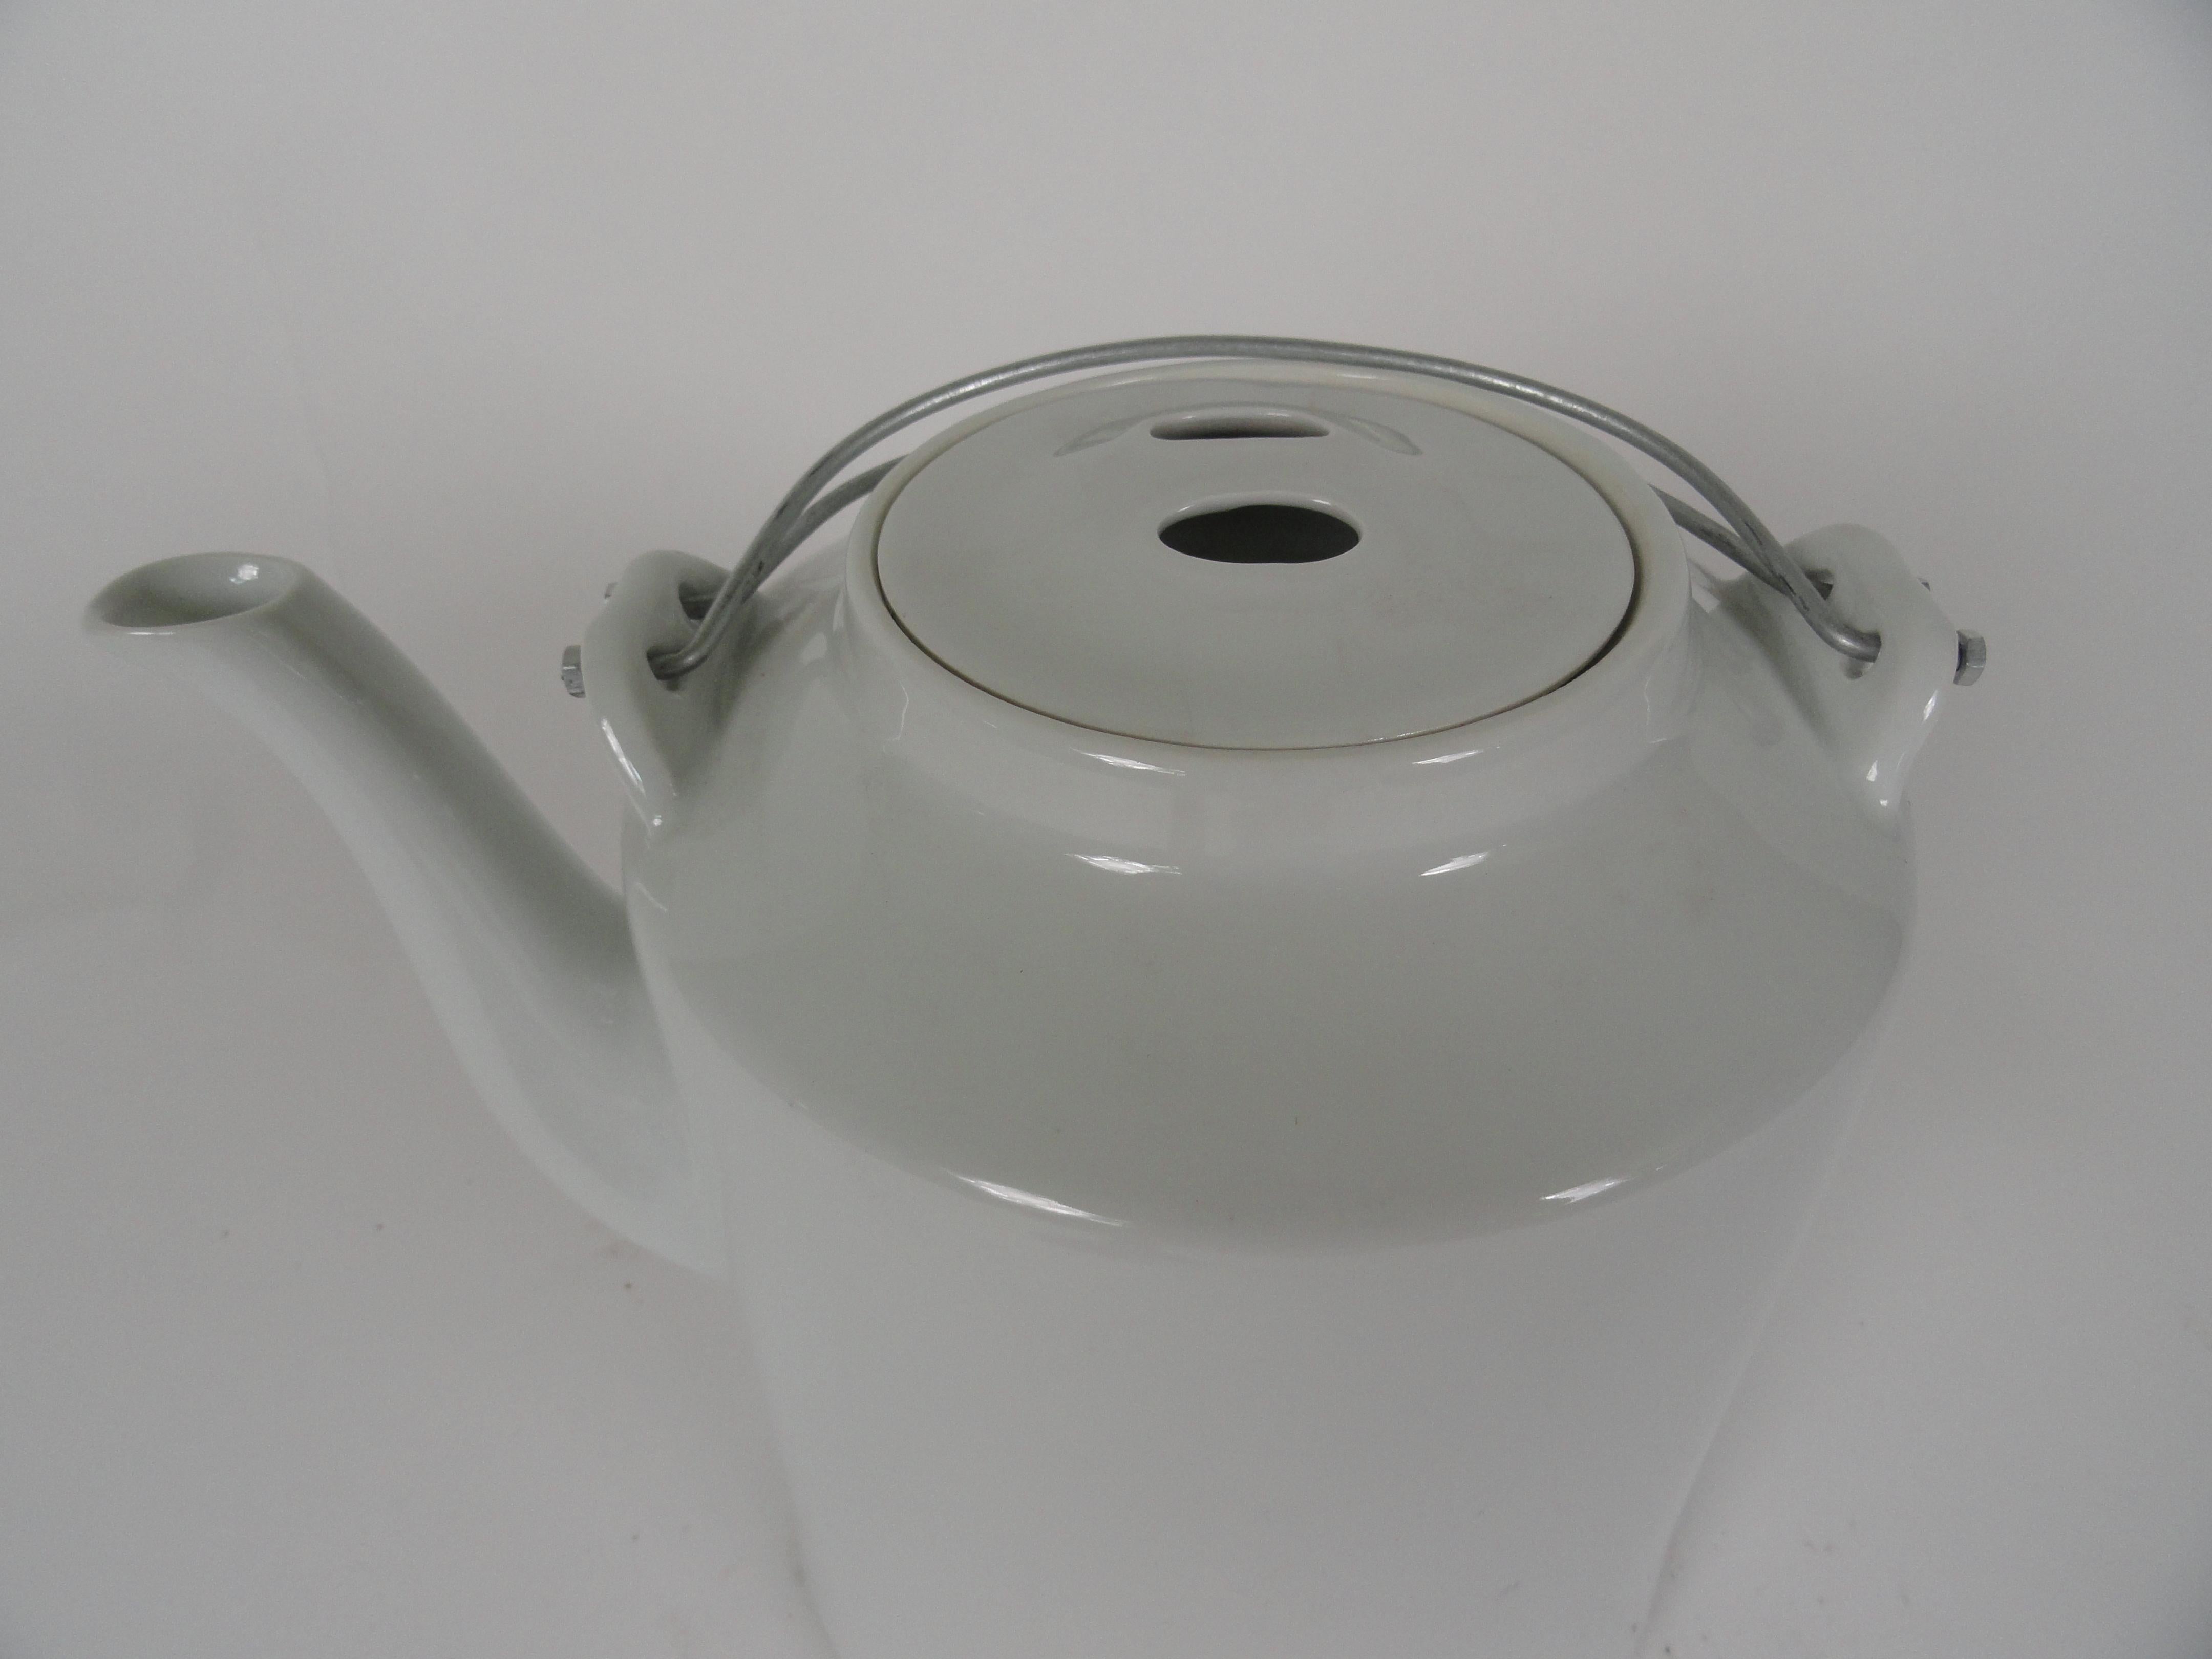 Contemporary large scale Blanc de Chin teapot from Janus et Cie. Has two thin metal handles and removable lid. Large scale. Stamp on bottom.